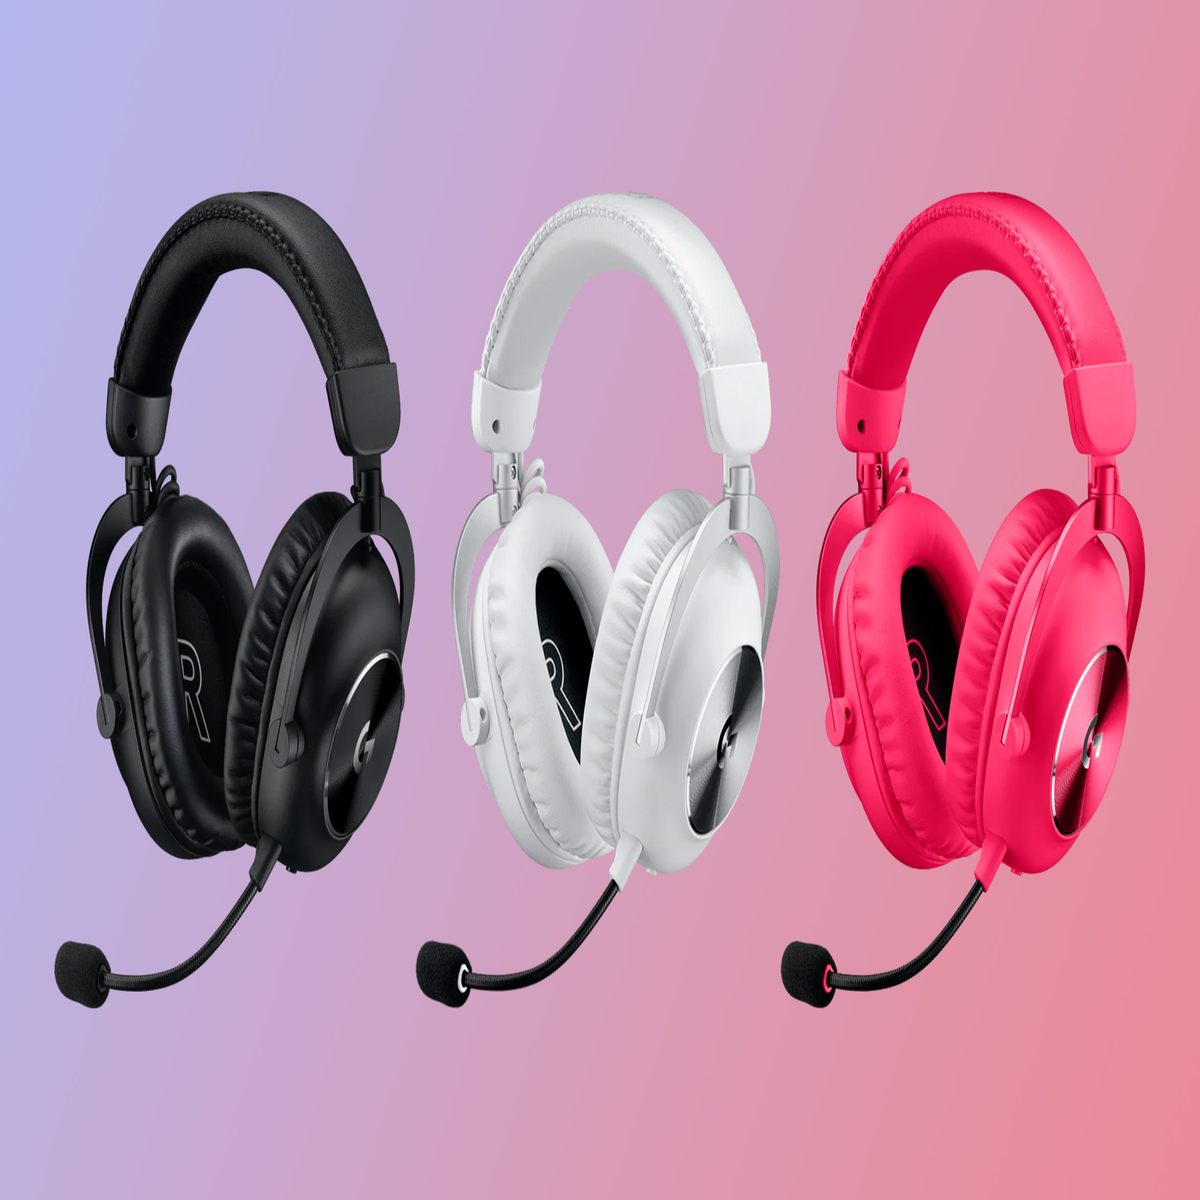 These top Logitech headsets are on sale at